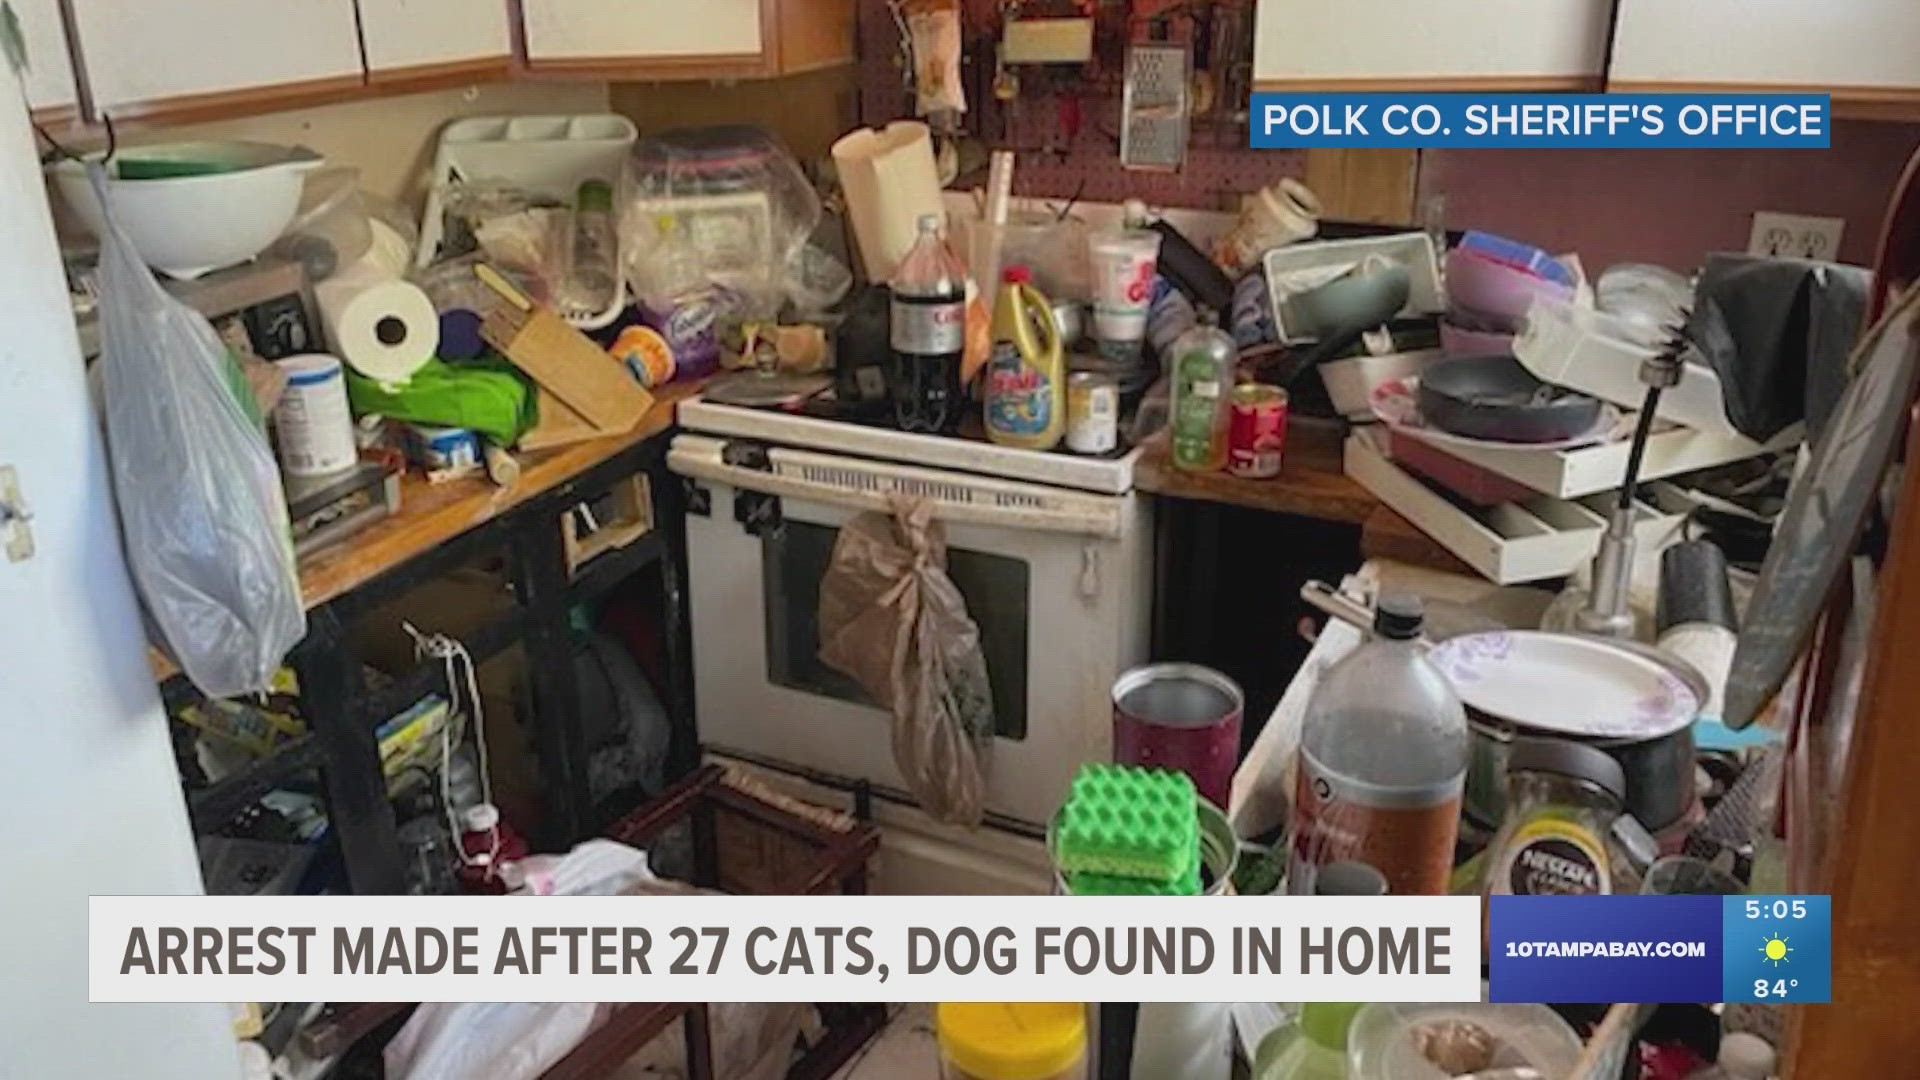 Nearly 30 animals were rescued, but five cats were found dead. This is the third animal hoarding case in Polk County since December, the sheriff's office said.